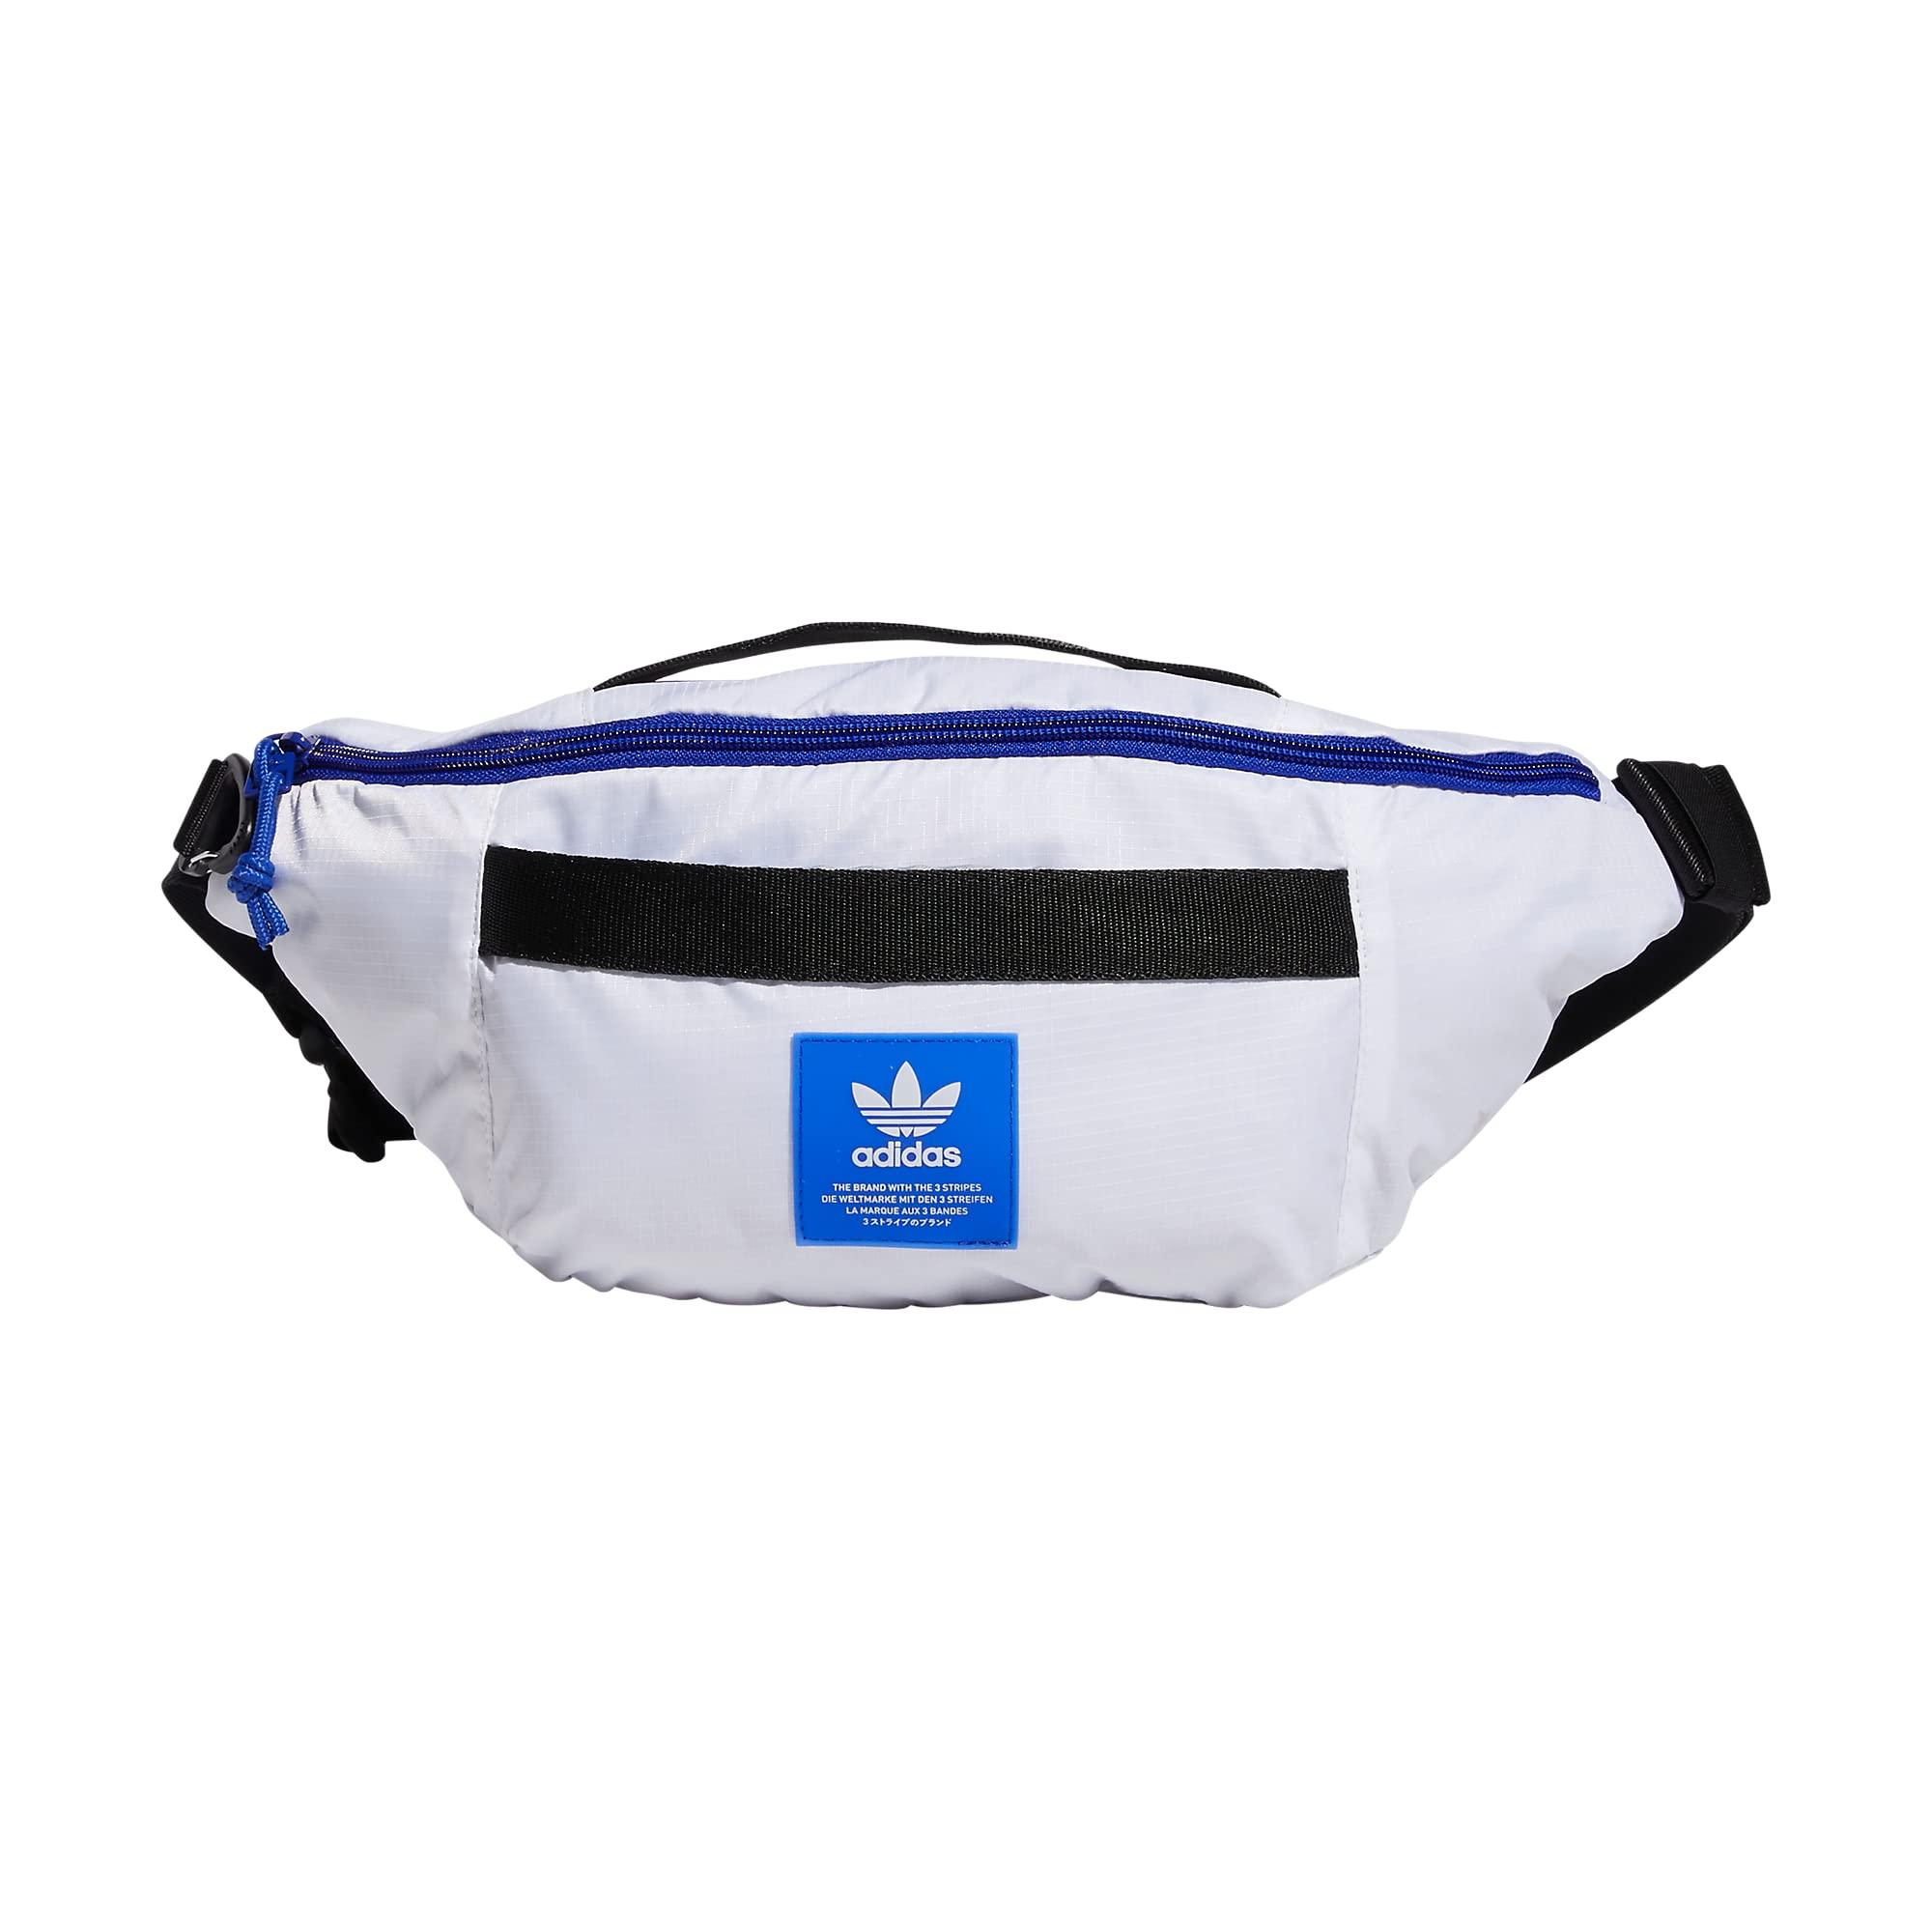 adidas Originals Sport Hip Pack/small Travel Bag in Blue | Lyst